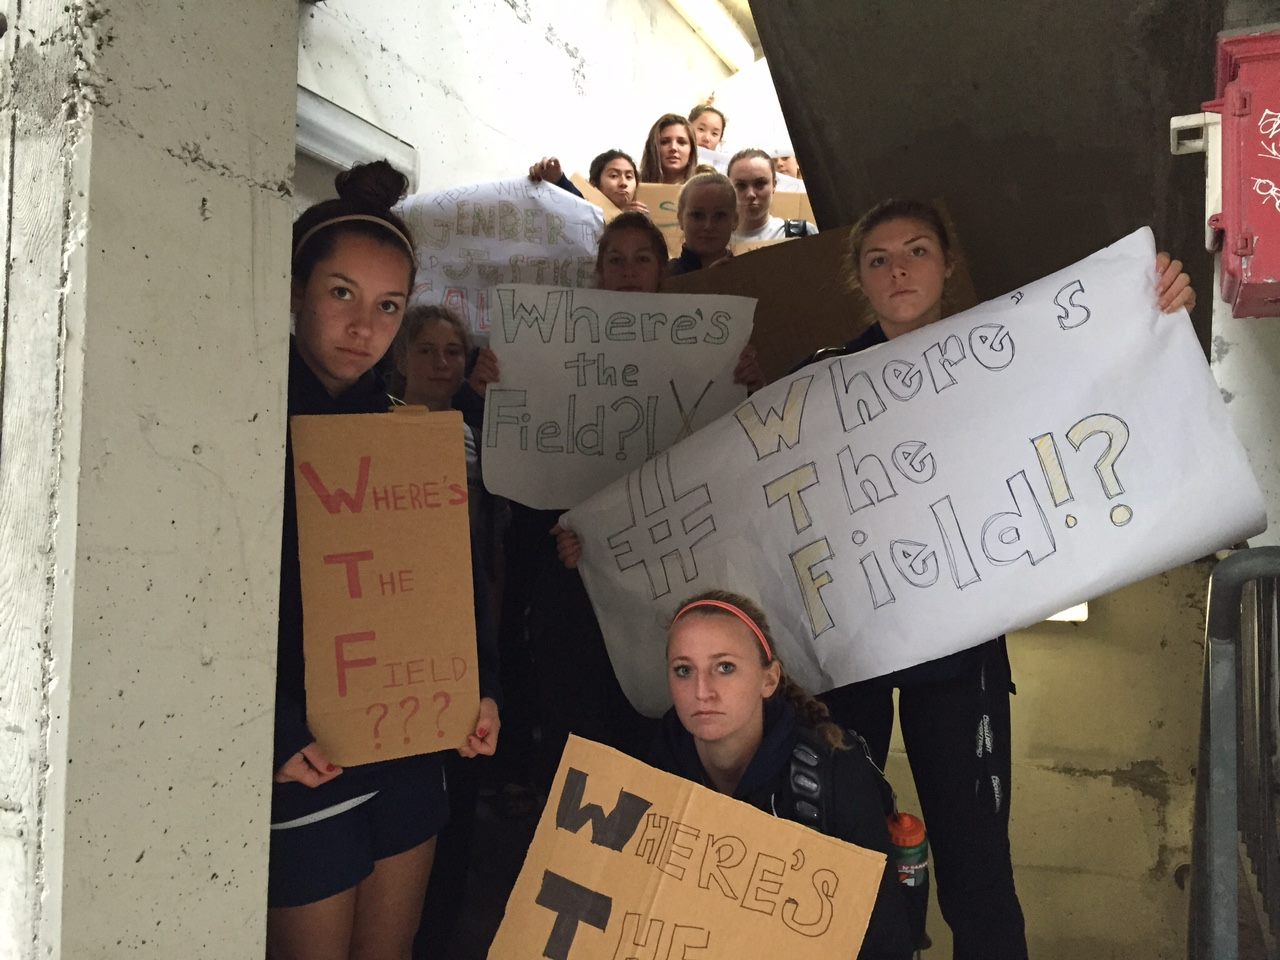 A photo of a group of young women Berkeley field hockey players in sweatshirts, looking into the camera with a challenge in their eyes, holding signs that say WTF, Where's The Field?